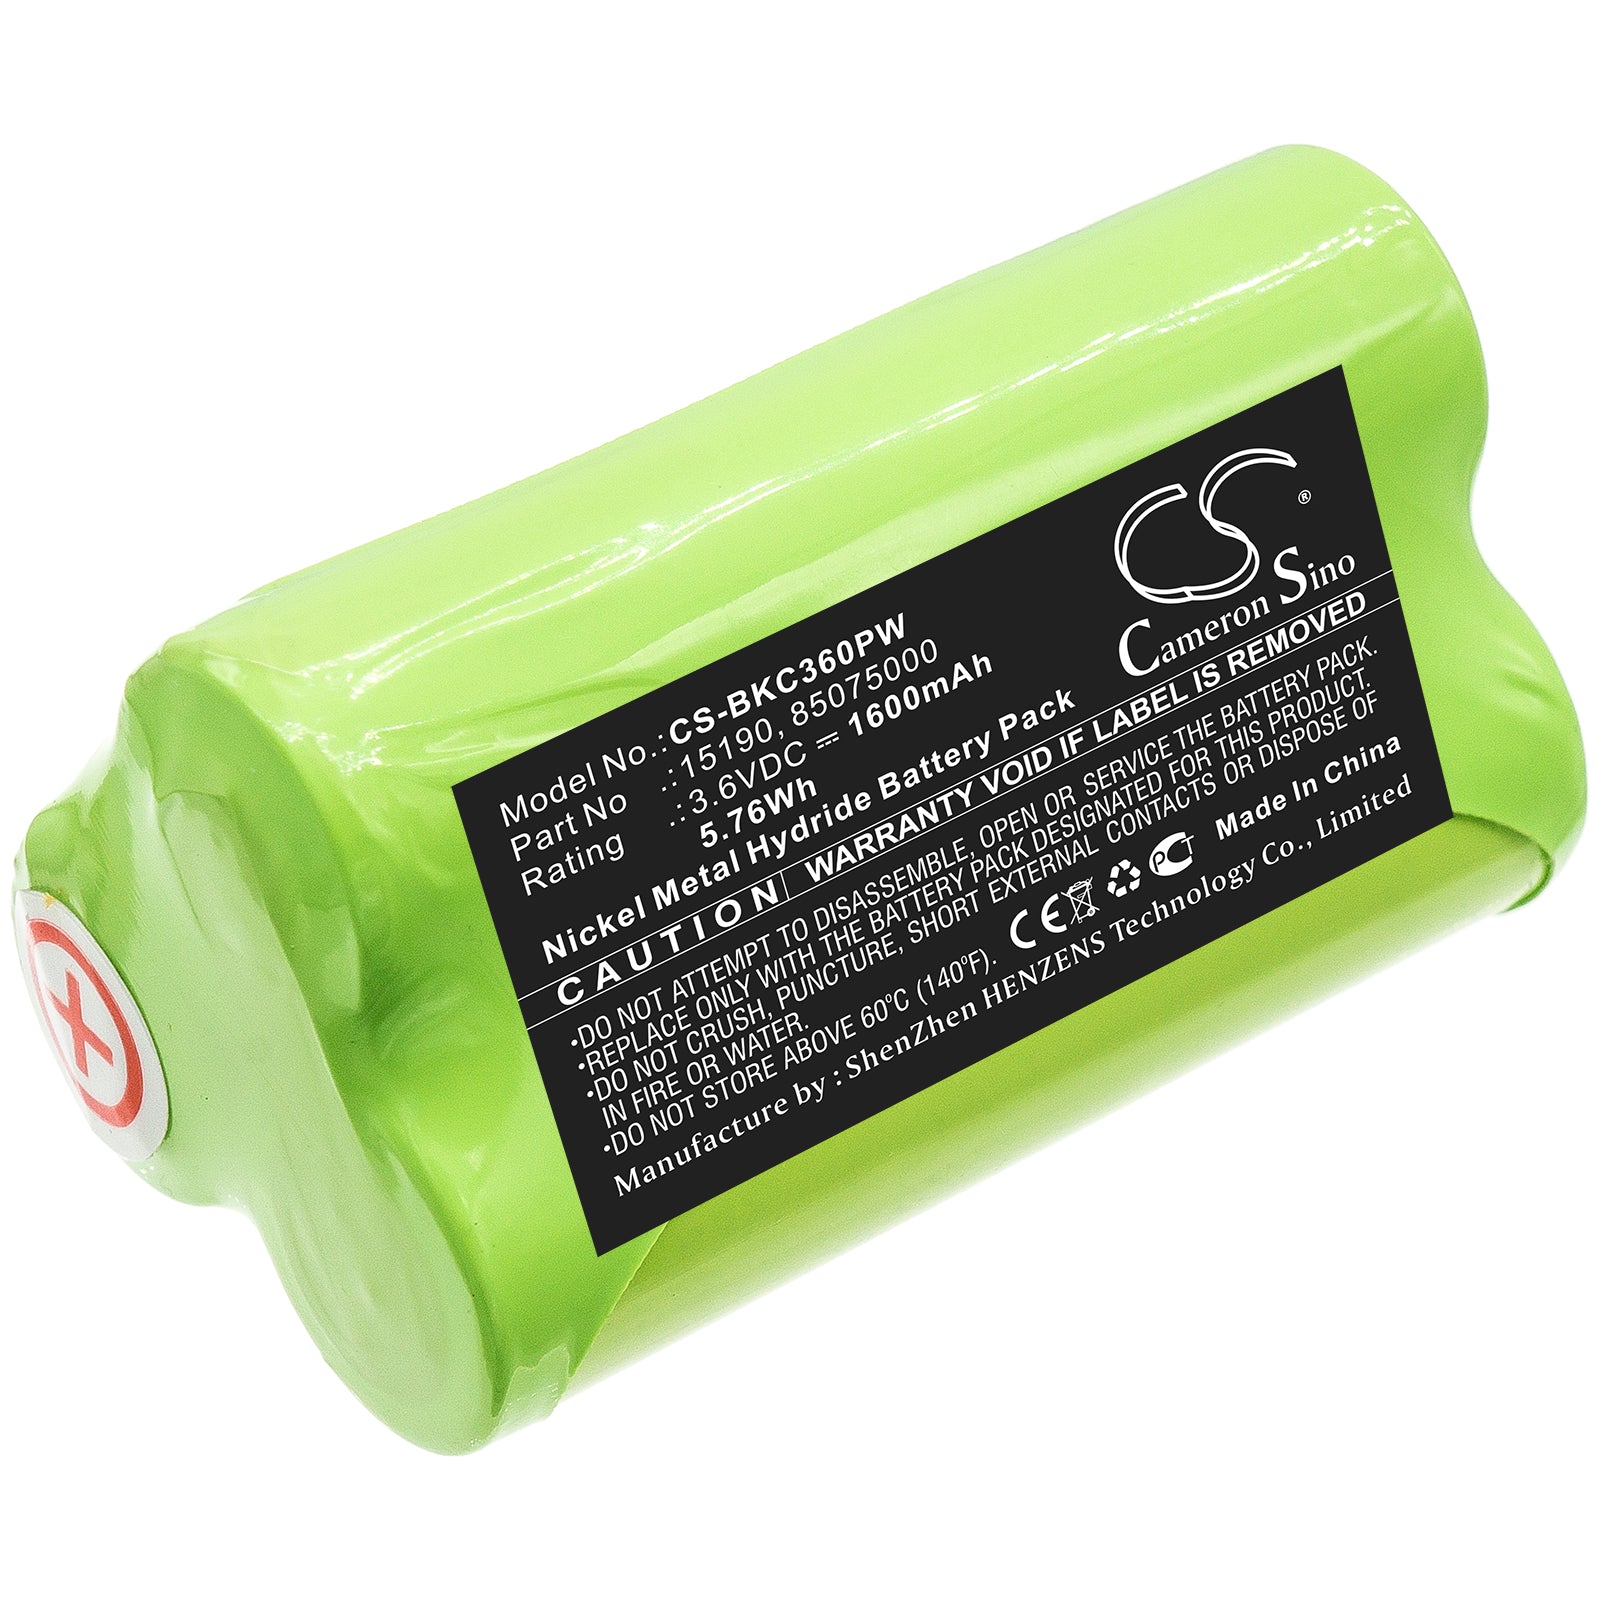 3.6V 3000mAh Ni-MH Replacement Battery for Black & Decker – Powerextra